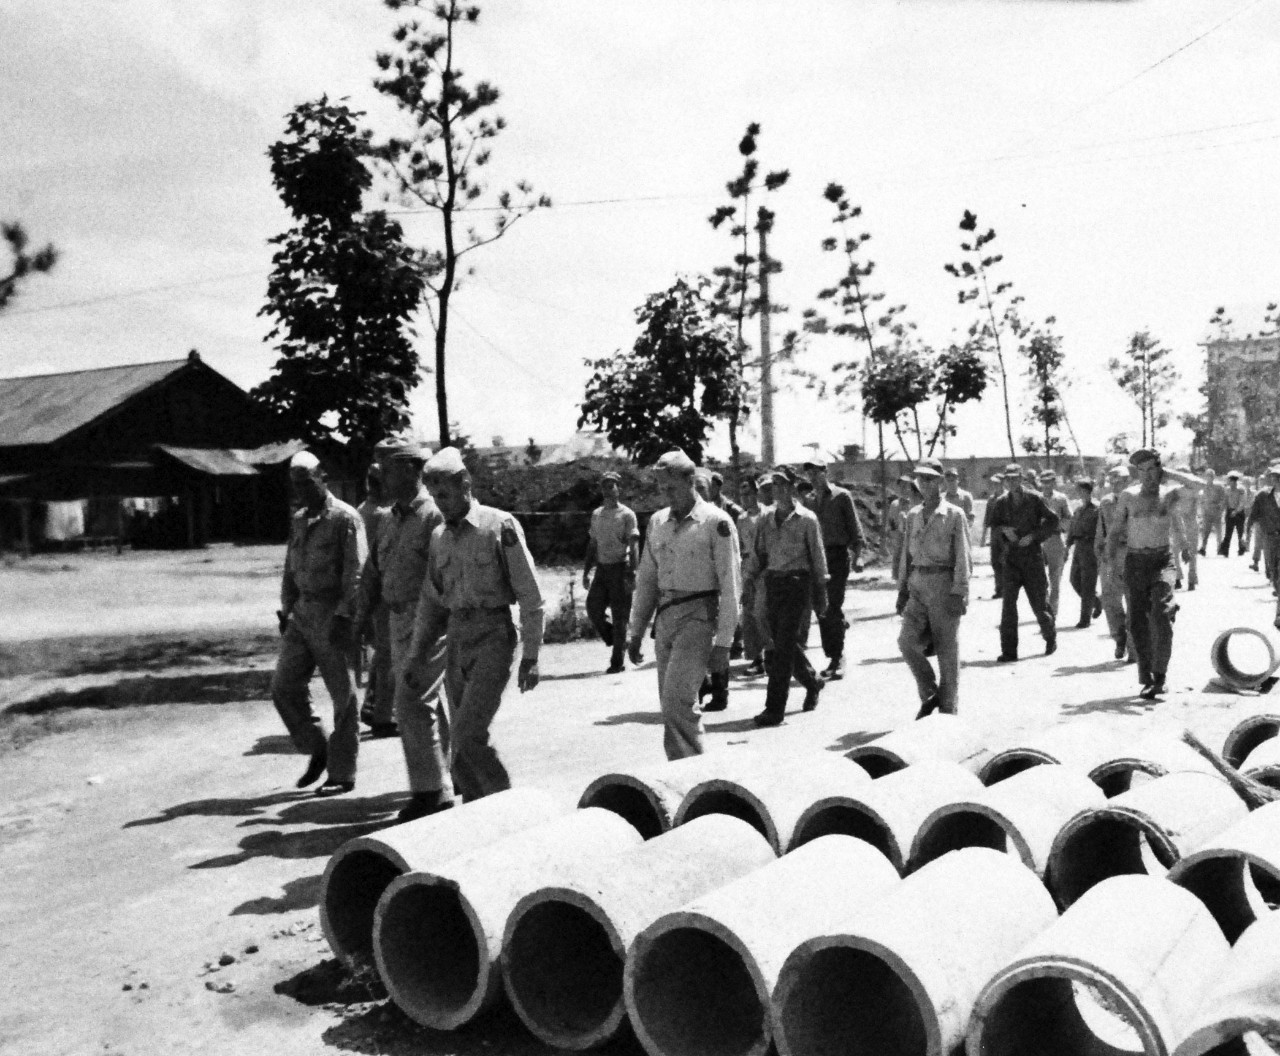 127-GW-1503-133807:   Prisoner of War Camp, Yokosuka, Japan, 1945.   General Clement leading Prisoners of War to chow, Yokosuka, Japan, September 6, 1945.   Photographed by Huddleston.   Official U.S. Marine Corps photograph, now in the collection of the National Archives.  (2014/6/5).  